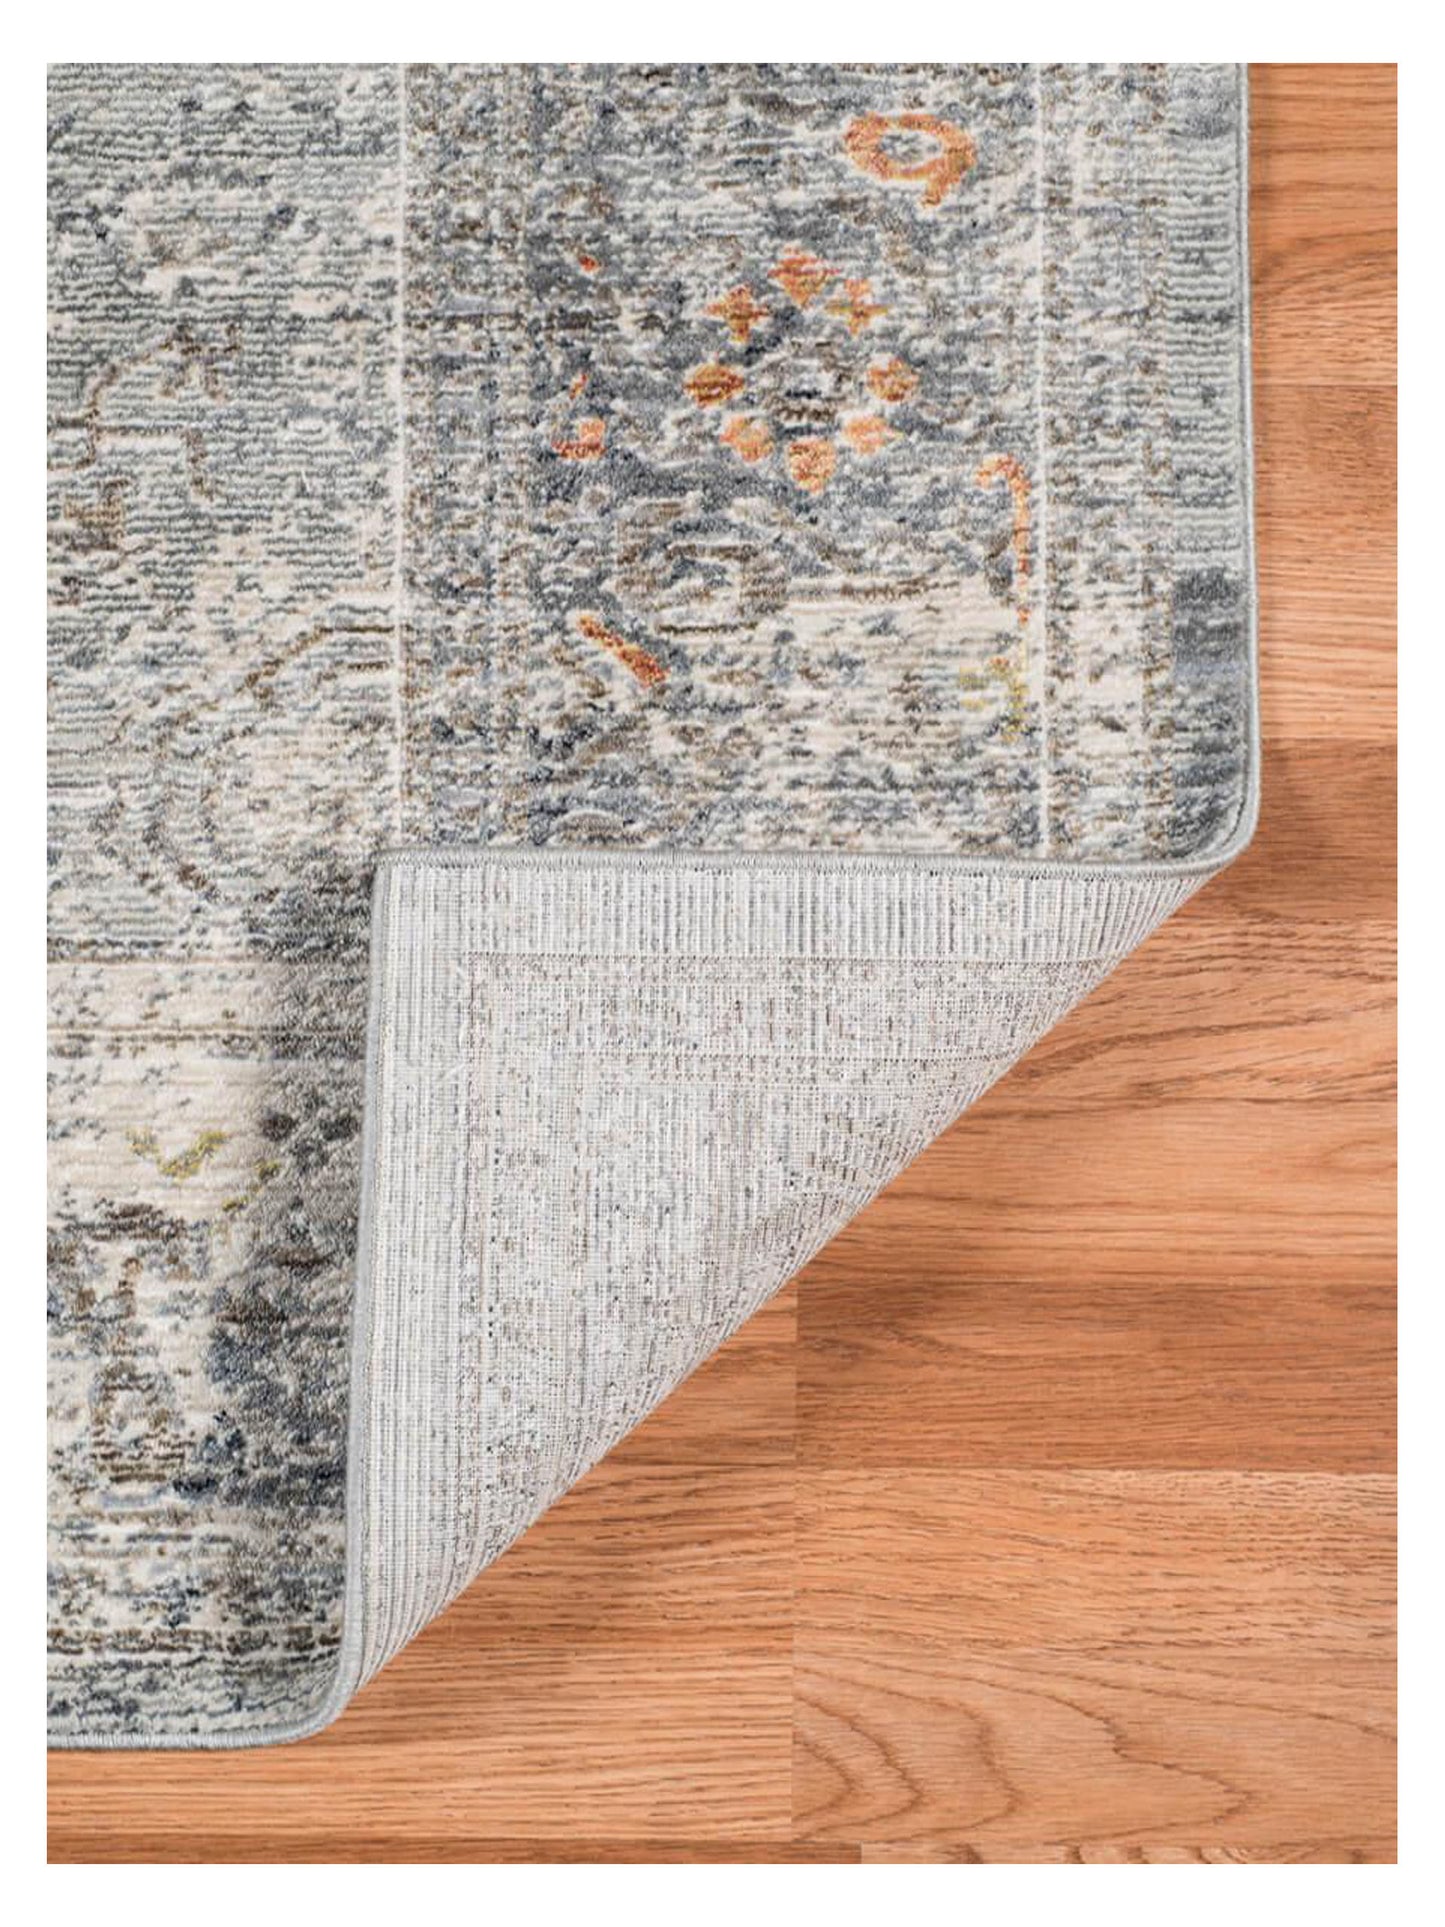 Limited Portia PE-153 SILVER  Traditional Machinemade Rug